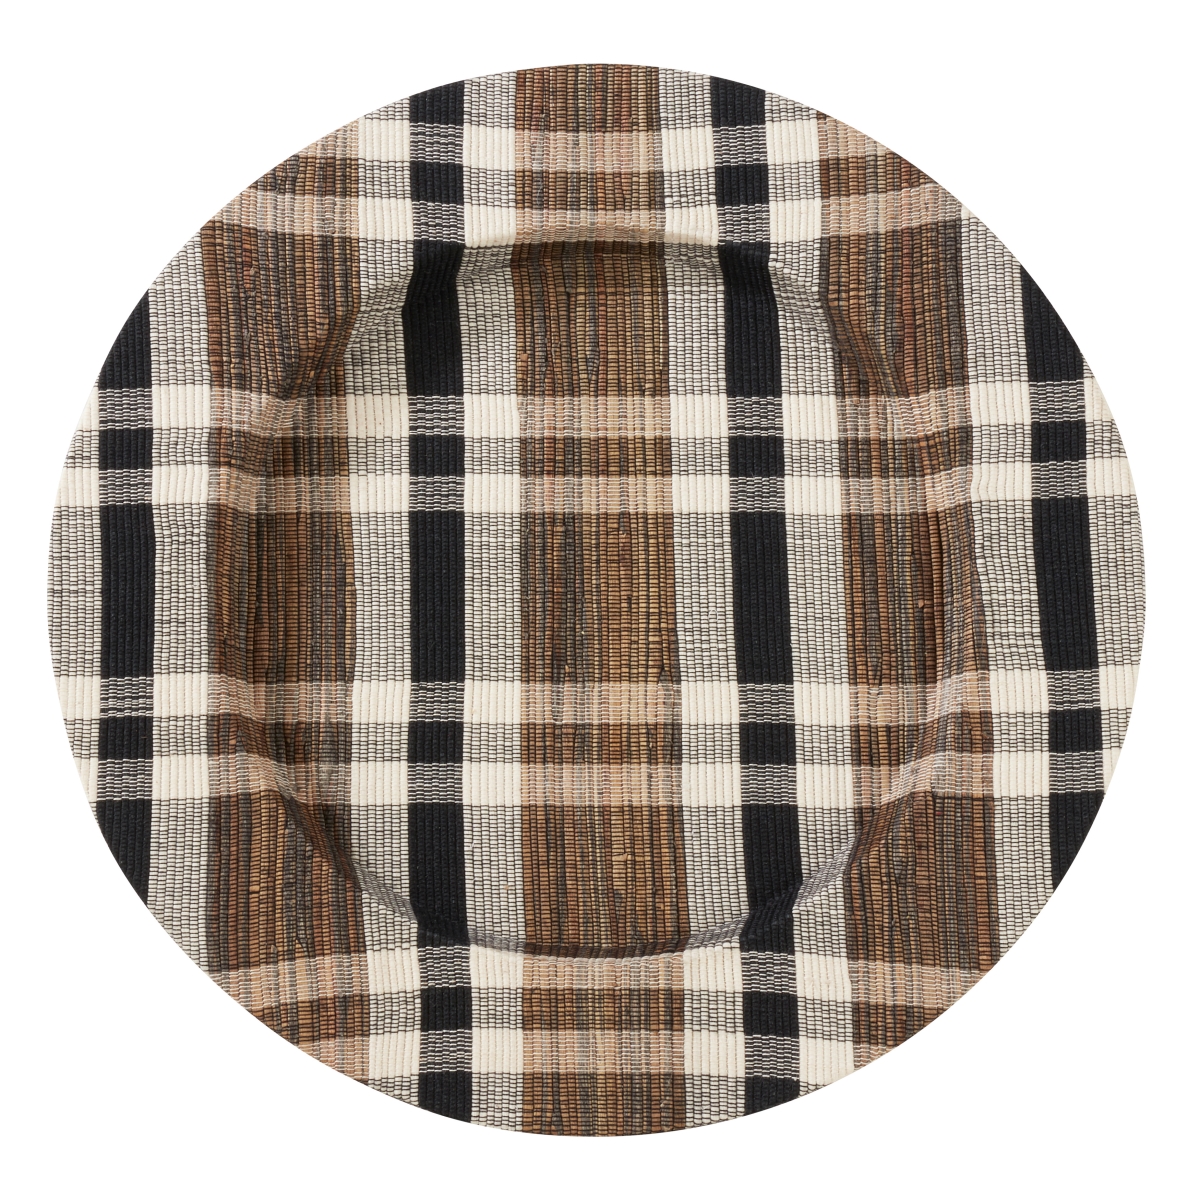 Ch805.n13r 13 In. Olivia Round Water Hyacinth Woven Plaid Chargers - Natural, Set Of 4